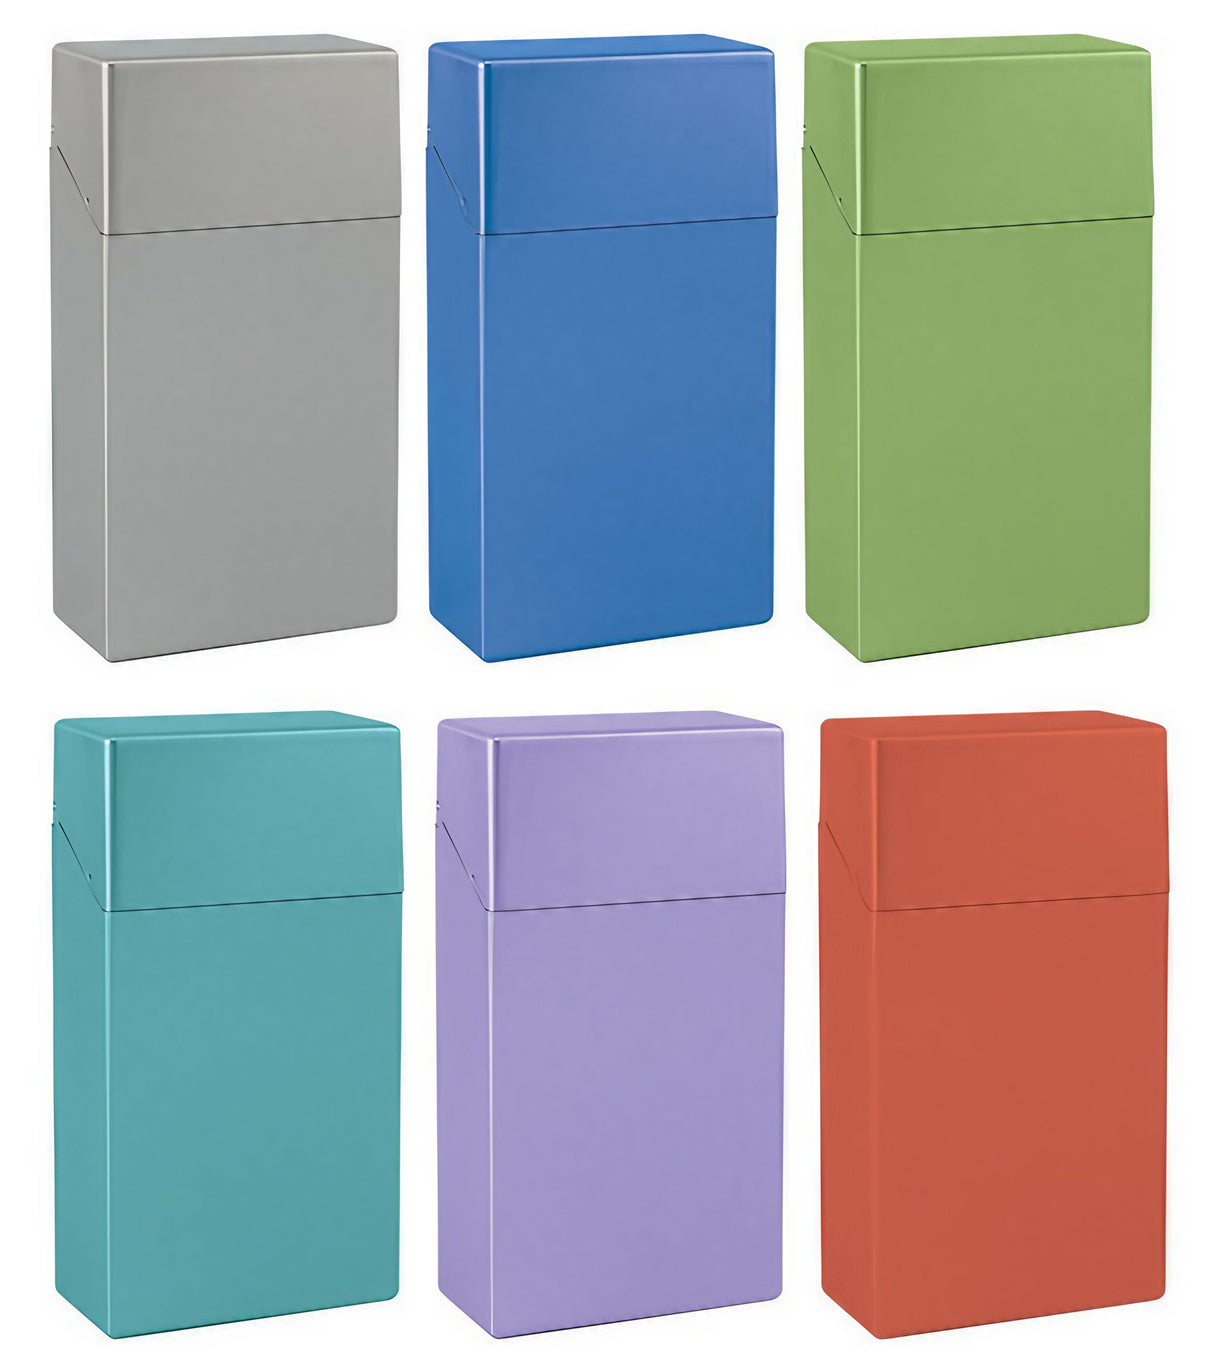 Assorted Fujima 100mm plastic cigarette cases in a 12 pack, showcasing compact and portable design